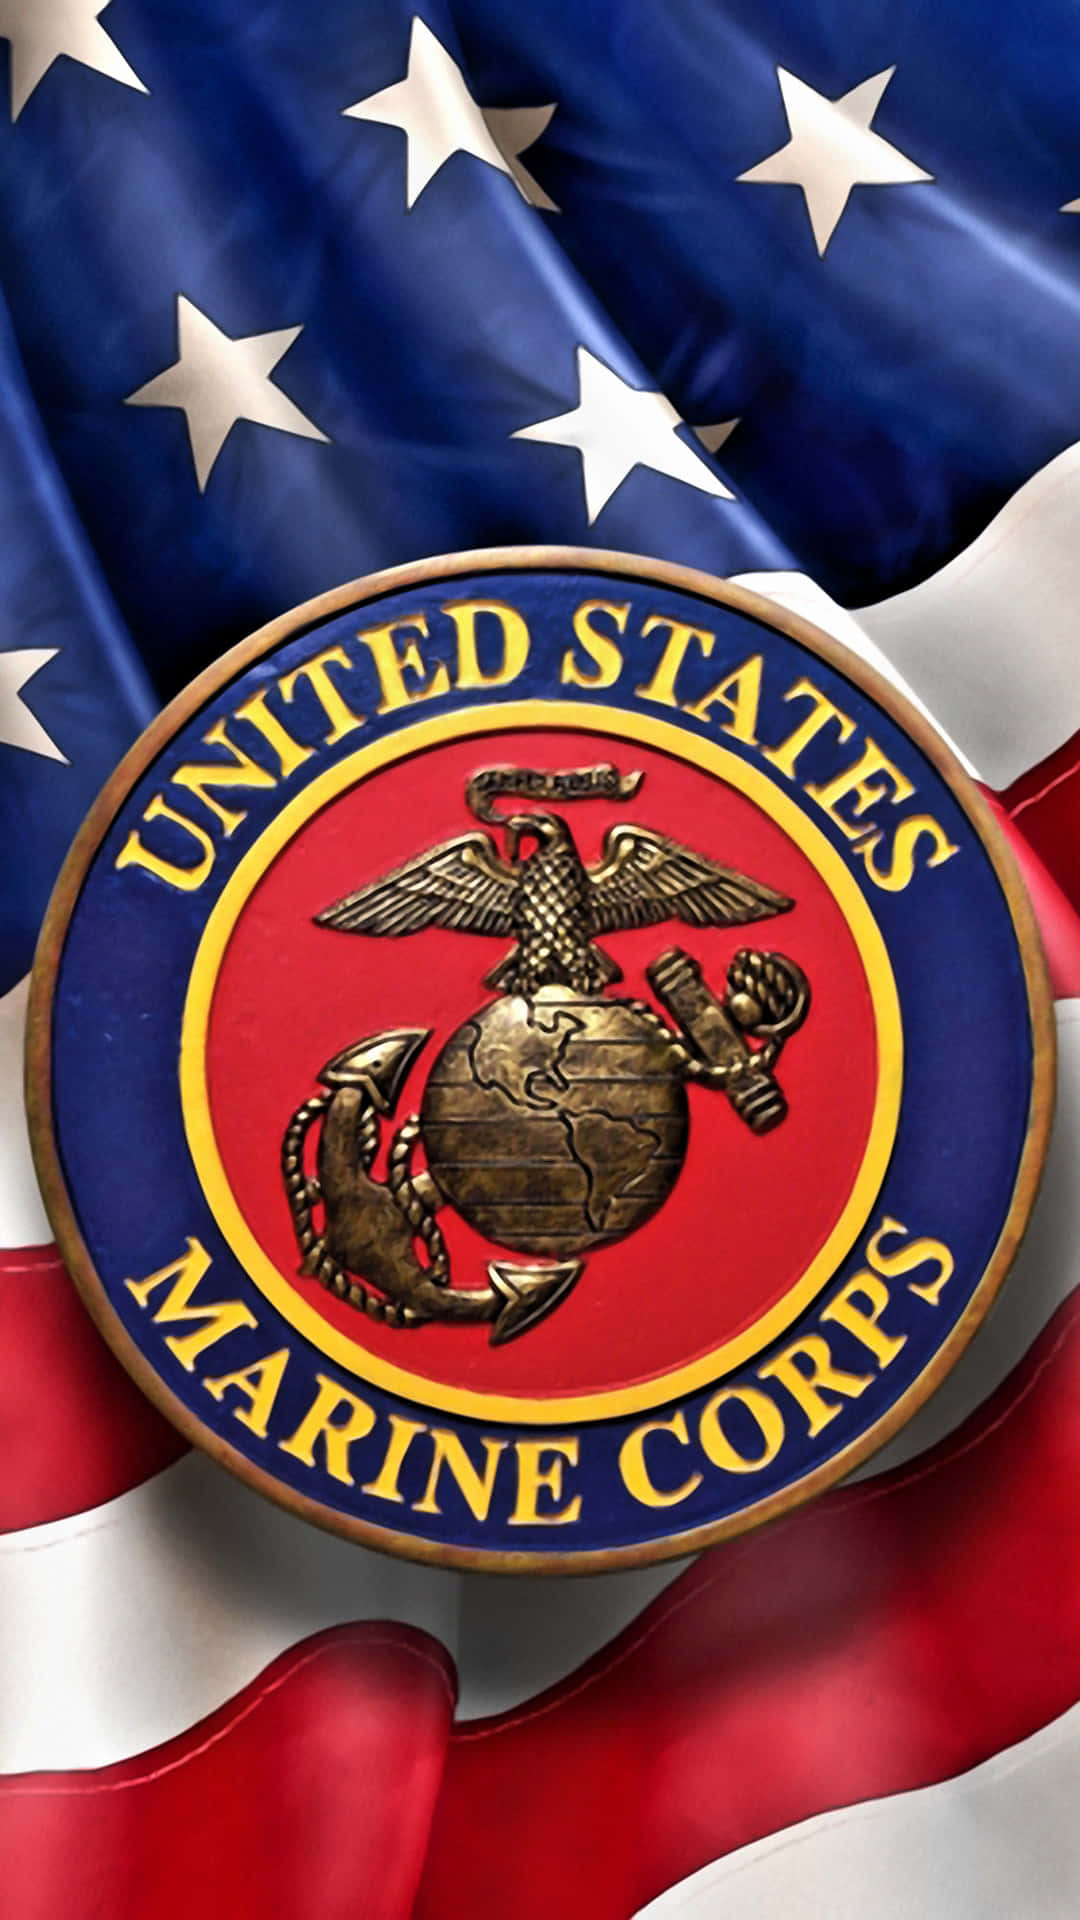 Honor the brave heroes of the US Marine Corps. Wallpaper